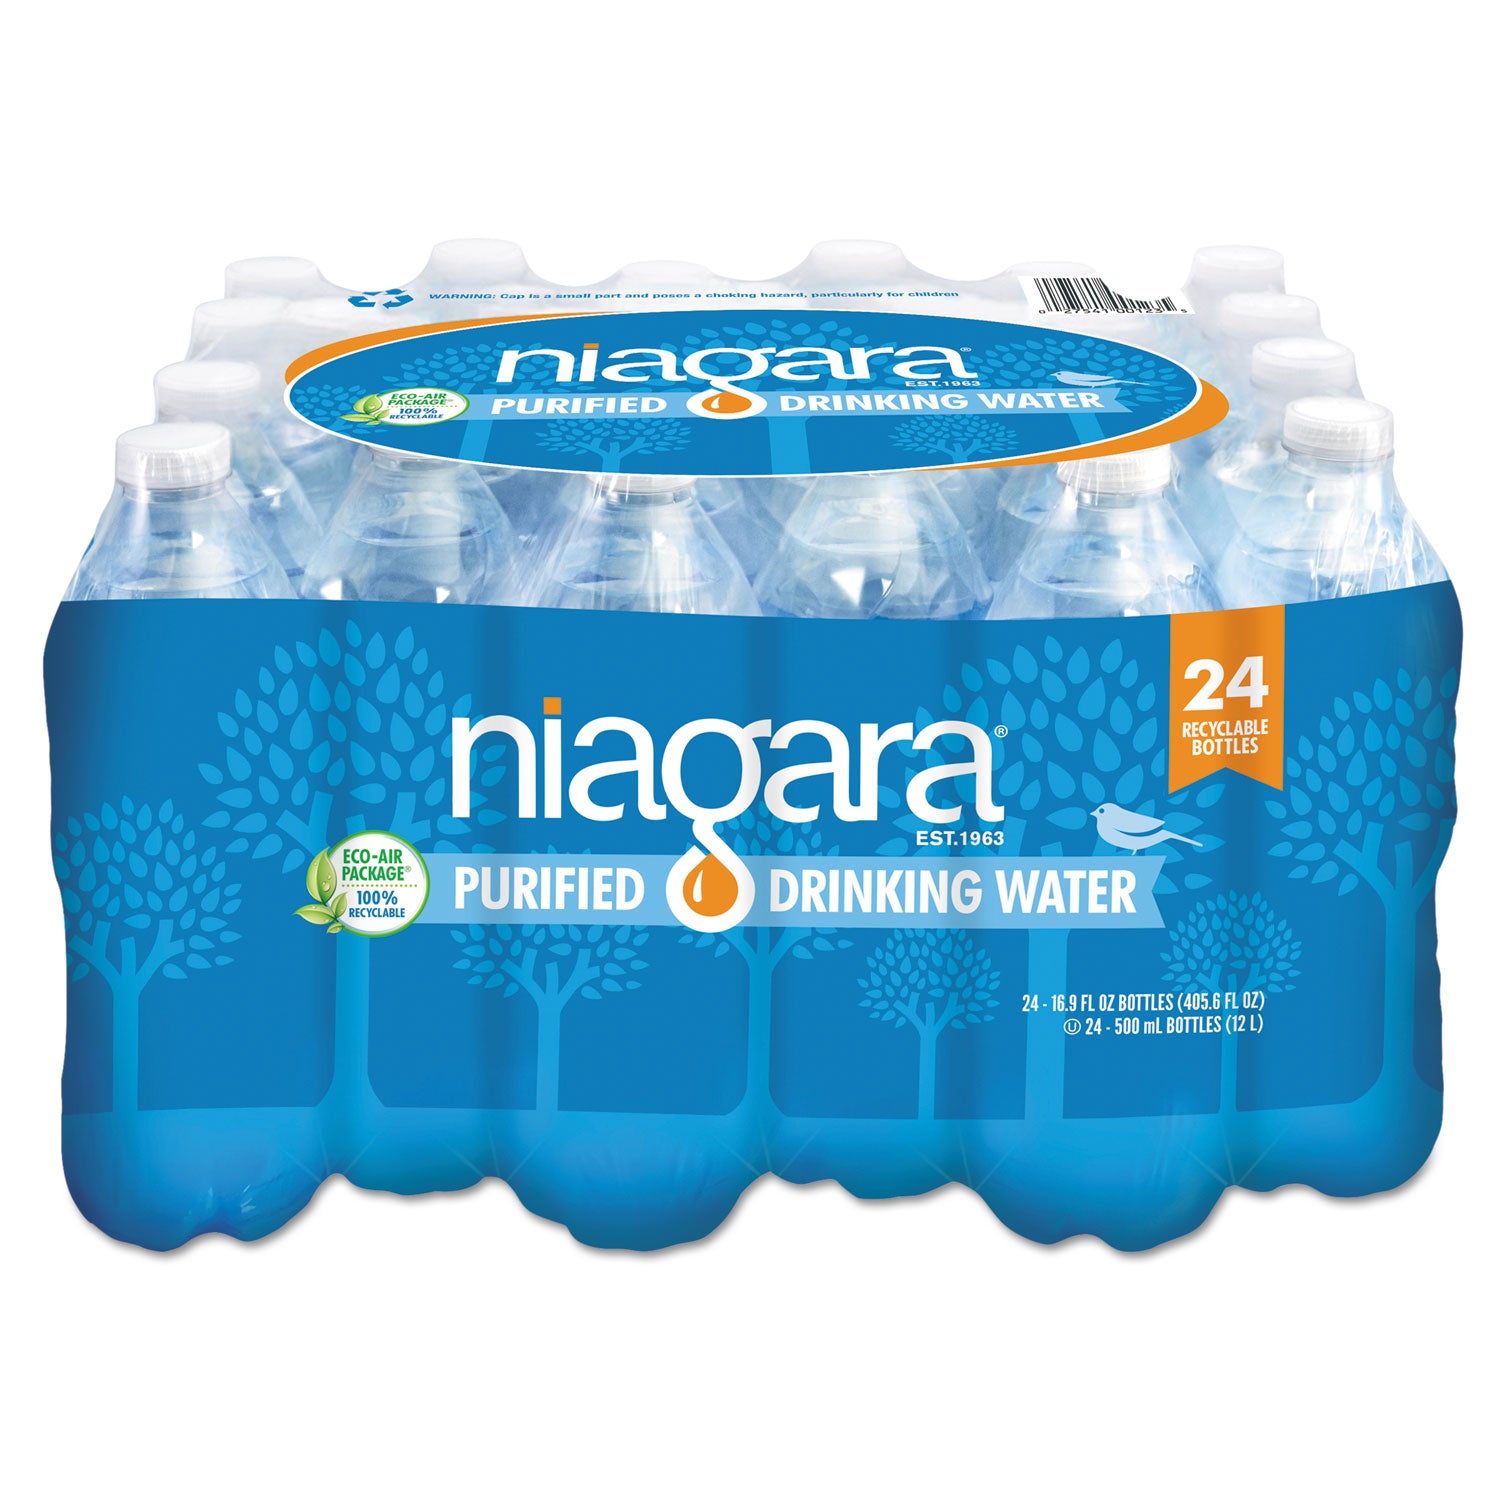 purified-drinking-water-169-oz-bottle-24-pack-2016-pallet_ngb05l24plt - 2